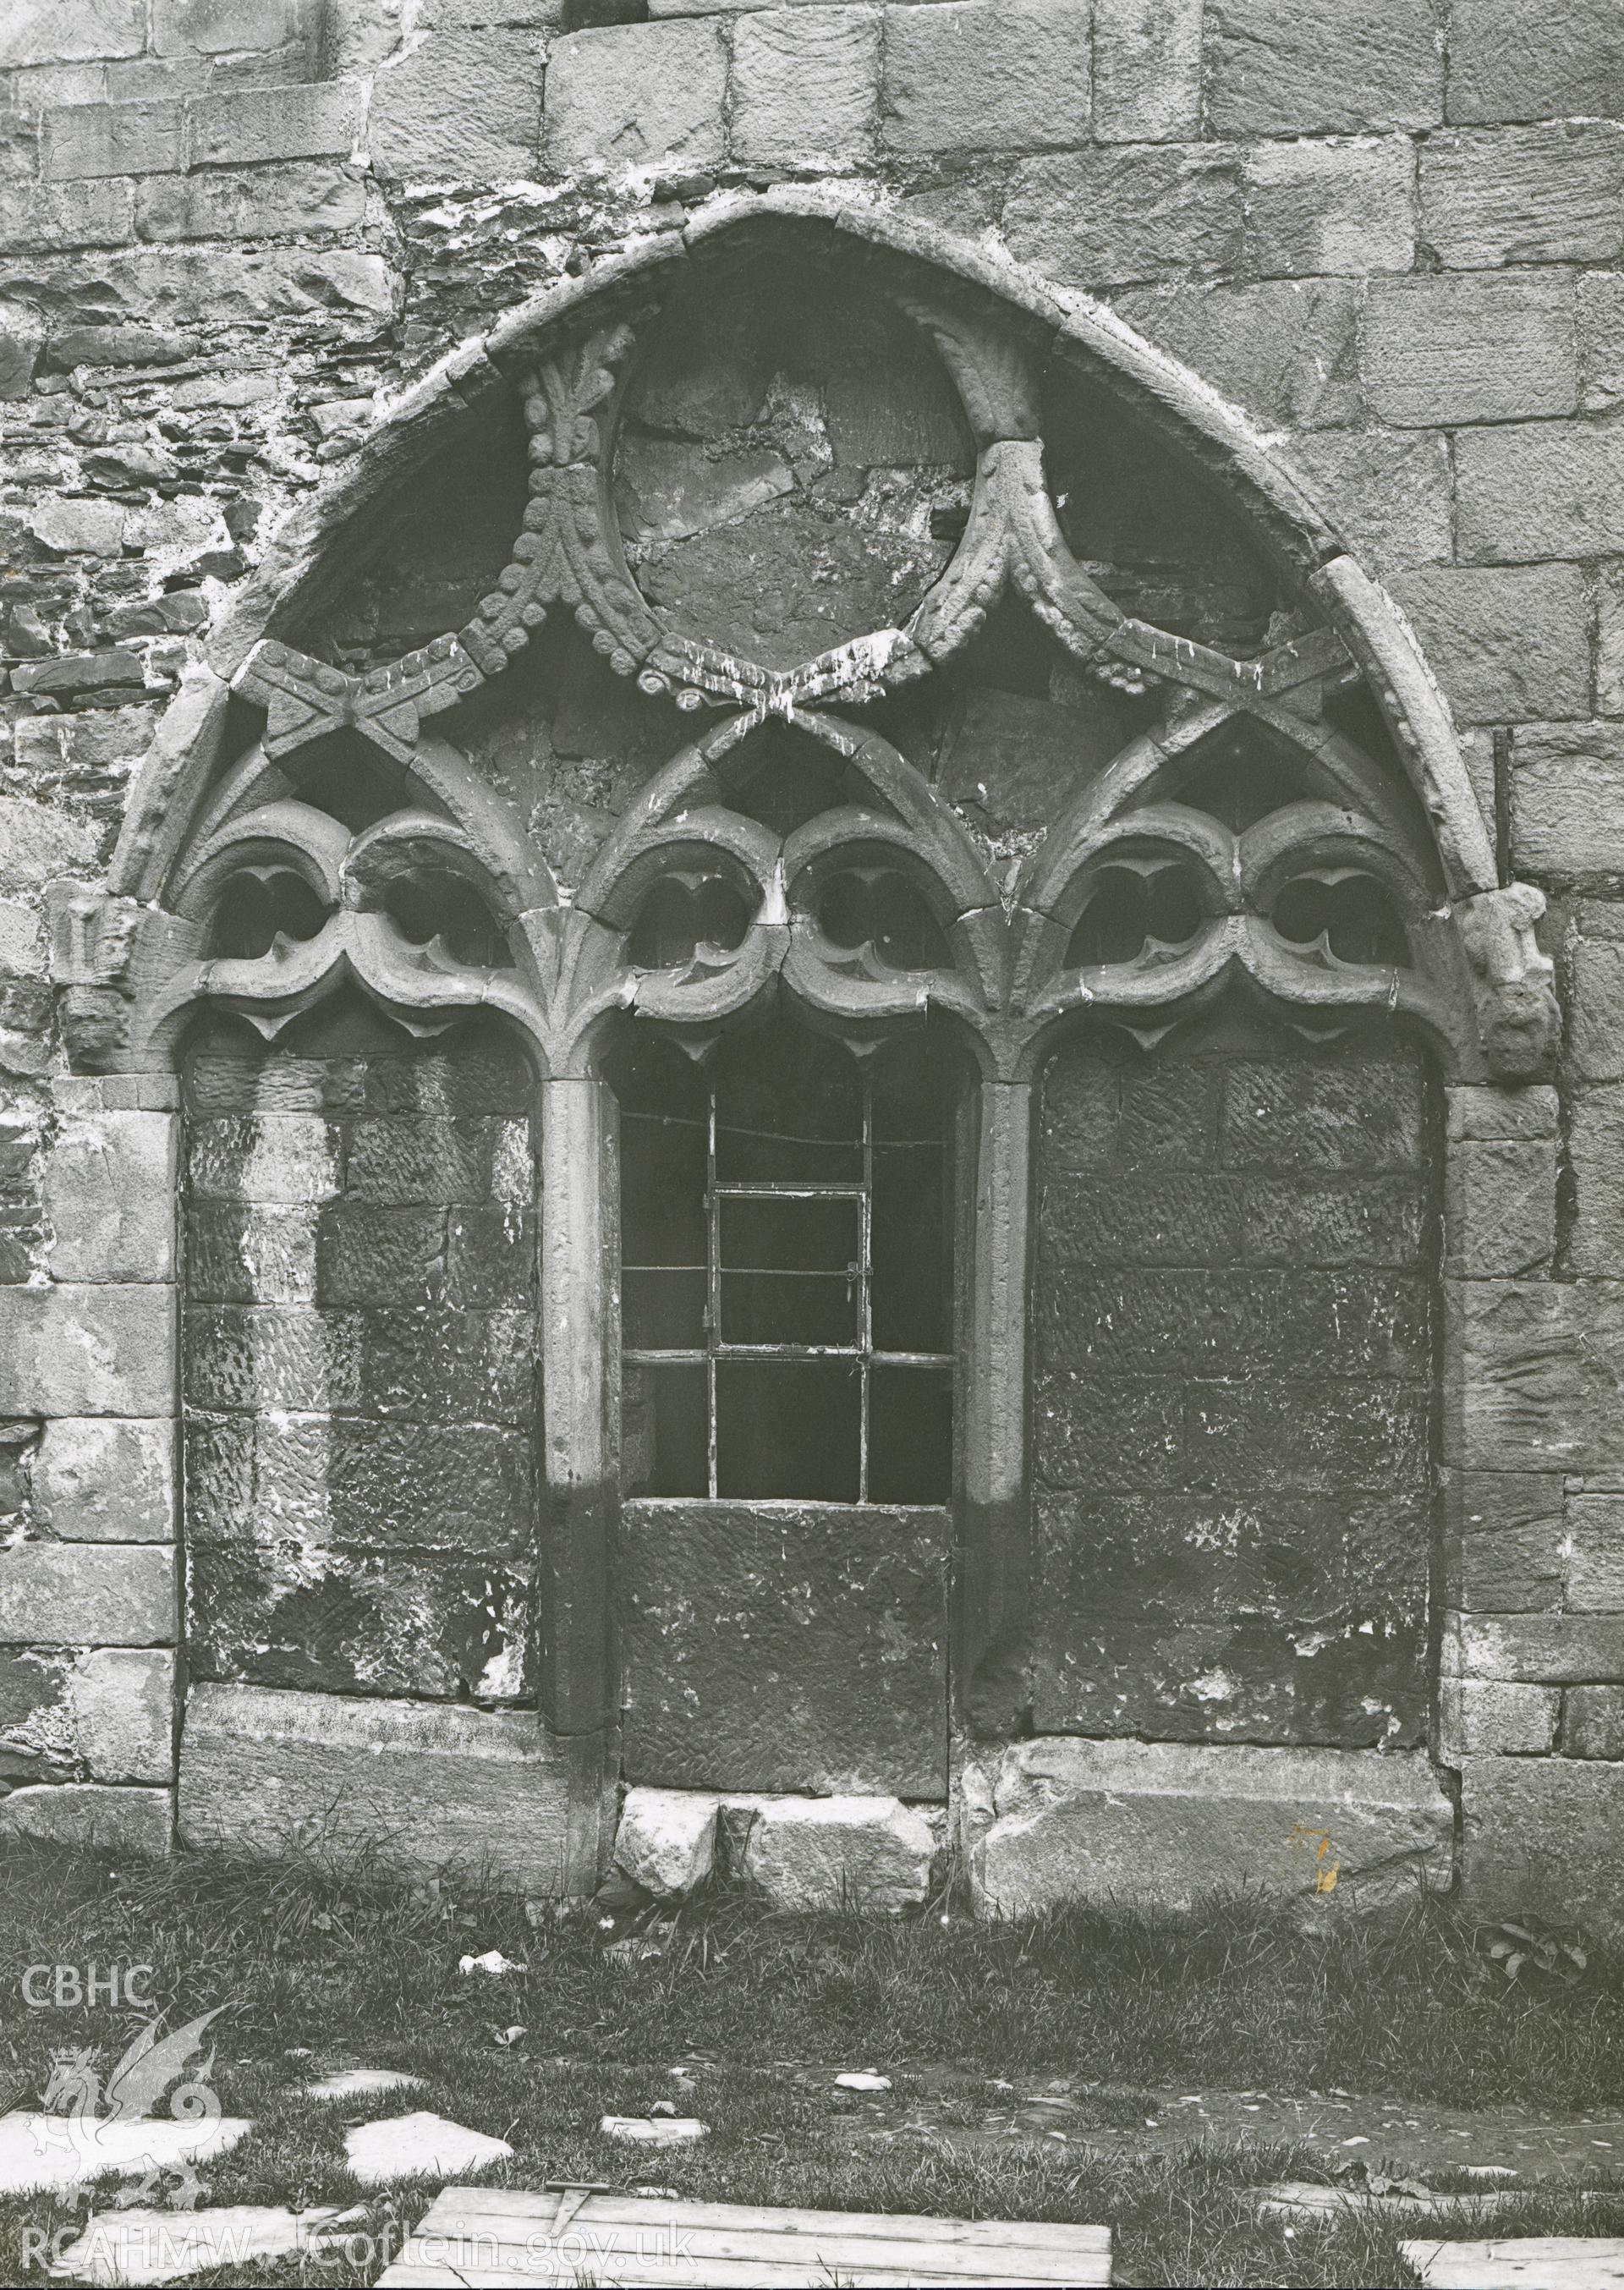 Digitised copy of a black and white photograph showing window of chapter house at Valle Crucis Abbey, taken by F.H. Crossley, 1949. Copied from print as negative held by NMR England (Historic England).